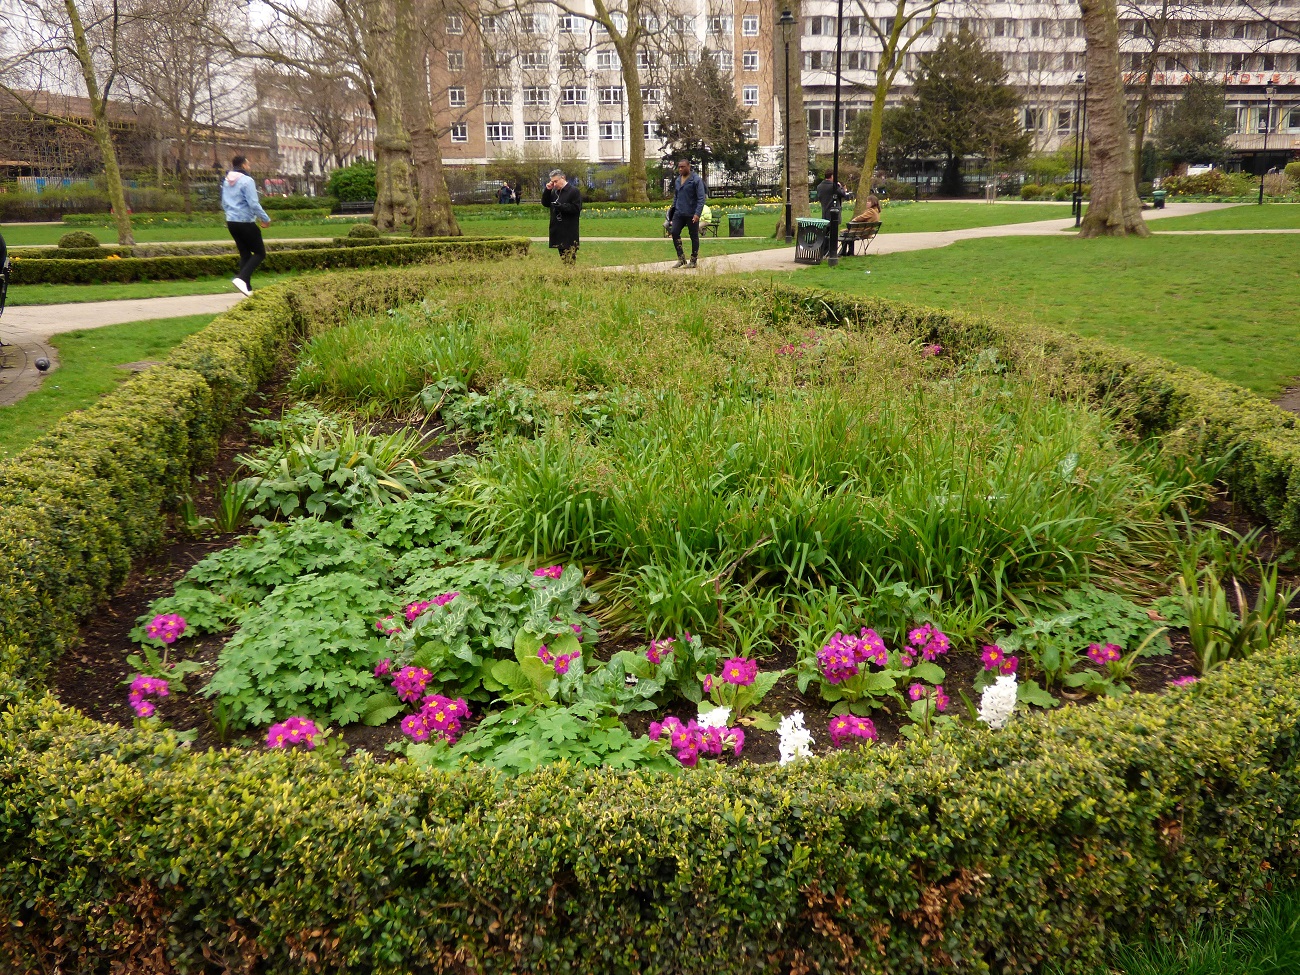 20170323_Camden_Russell-Square_Flower-Beds-at-Russell-Square